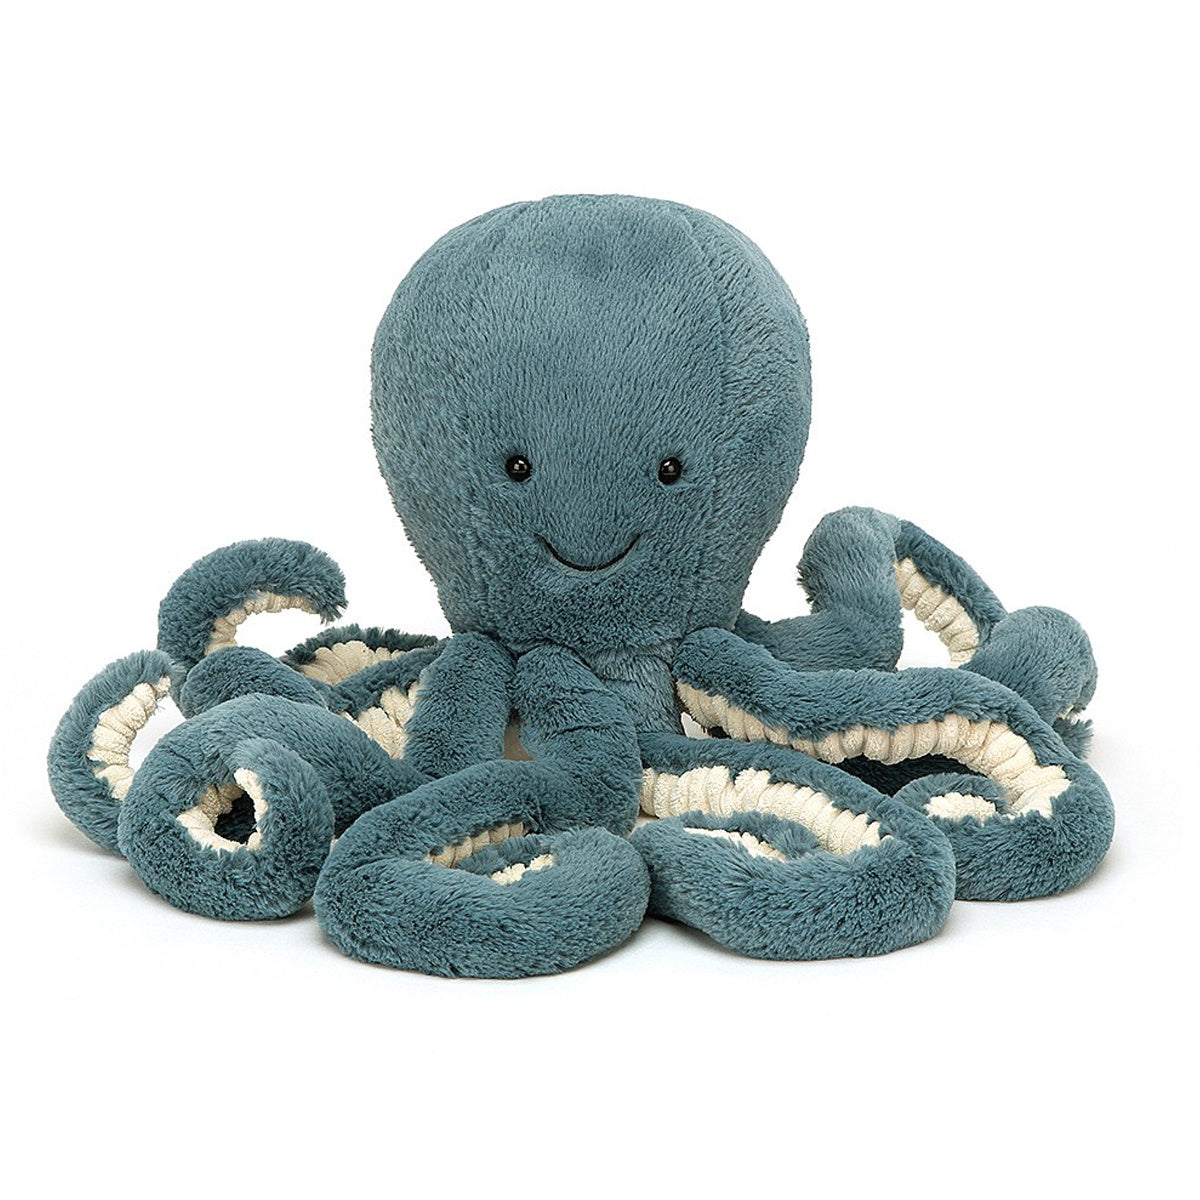 Deer Industries Kids Store Jellycat Storm Octopus Soft Toy Blue. Plush octo great decor for nursery, kids room or play area. Perfect kids gift this soft sea creature. 